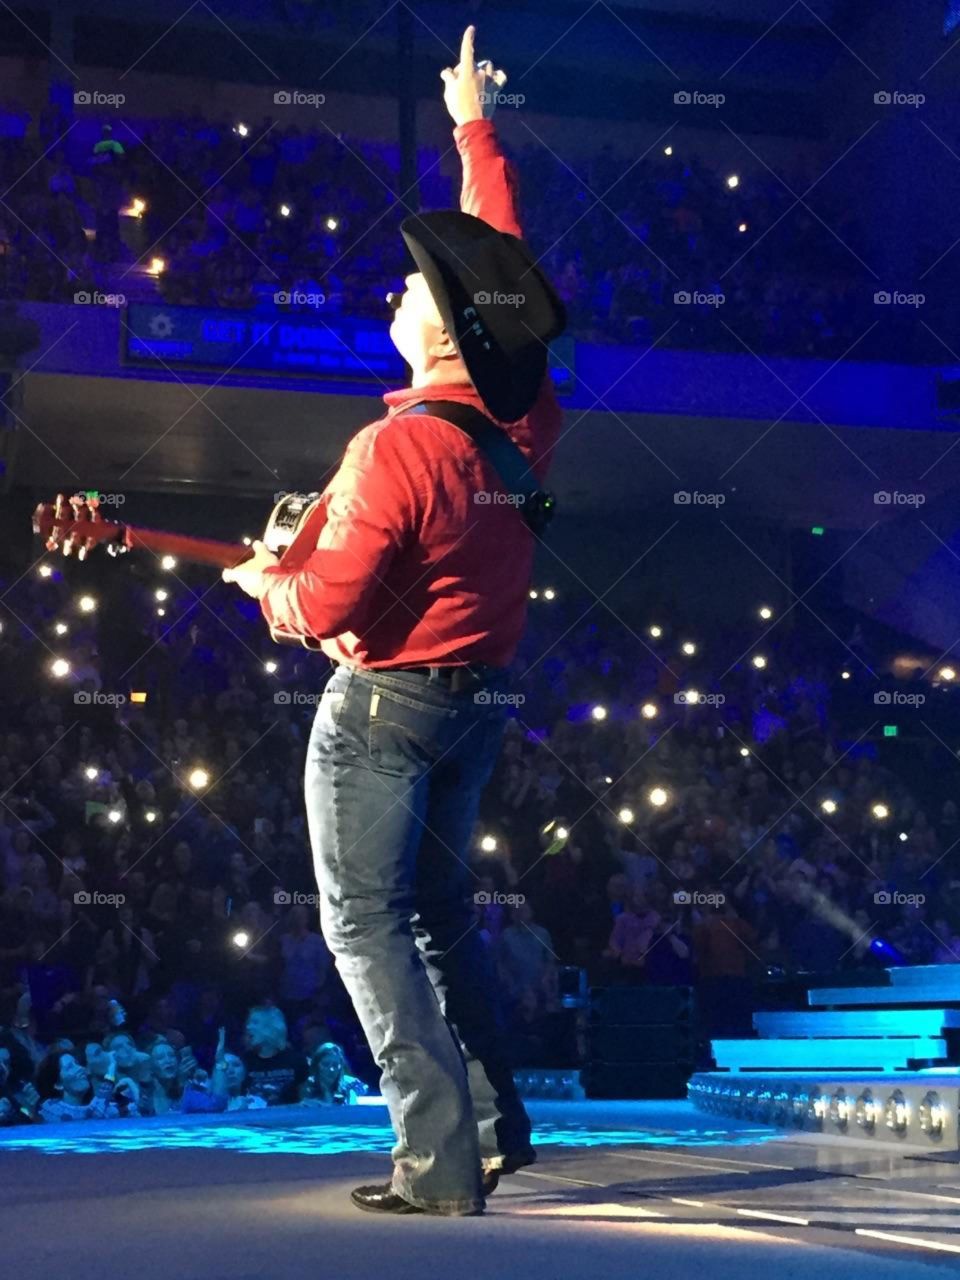 This is a photo of Garth Brooks taken from front row seats at his concert.